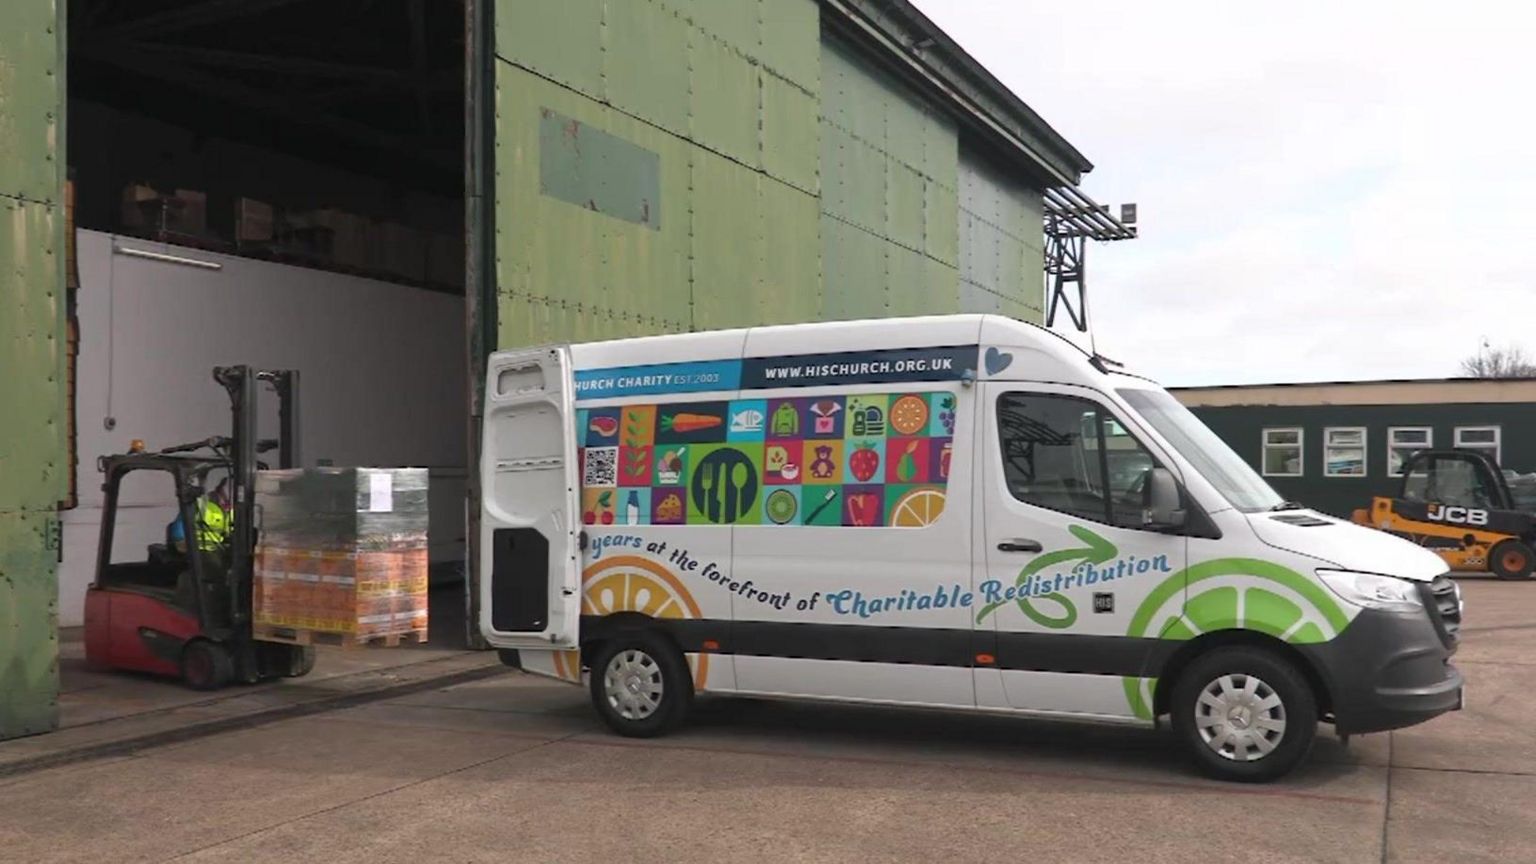 The new HisChurch van being loaded up with a pallet of food at the charity's distribution centre.